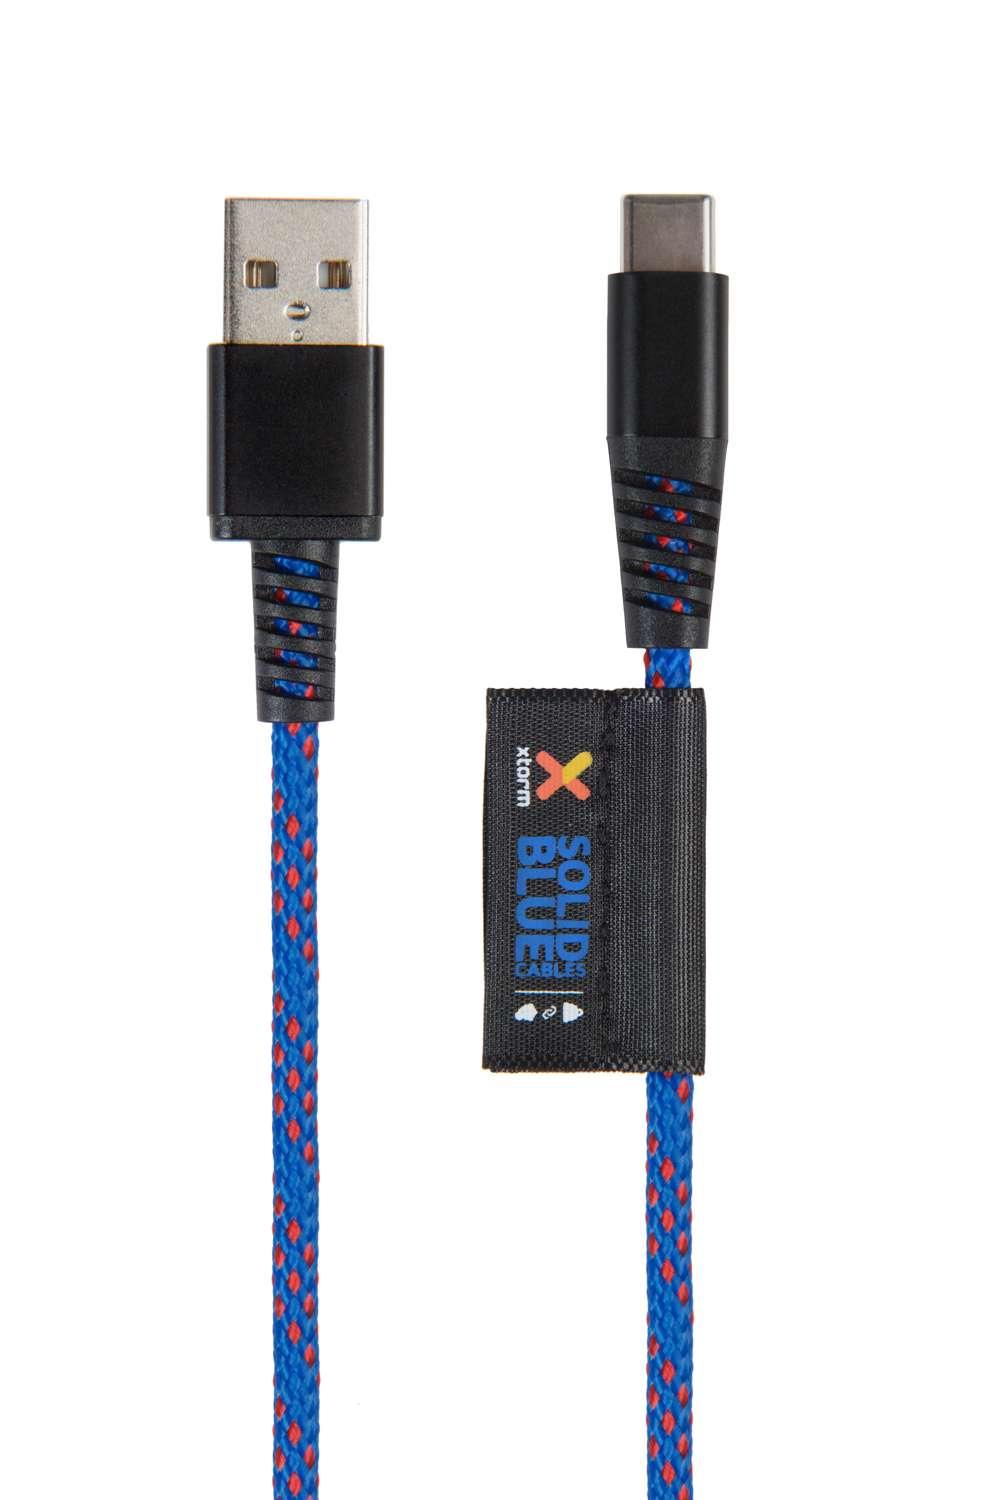 Solid Blue USB to USB-C Cable - 1 meter - Xtorm EU